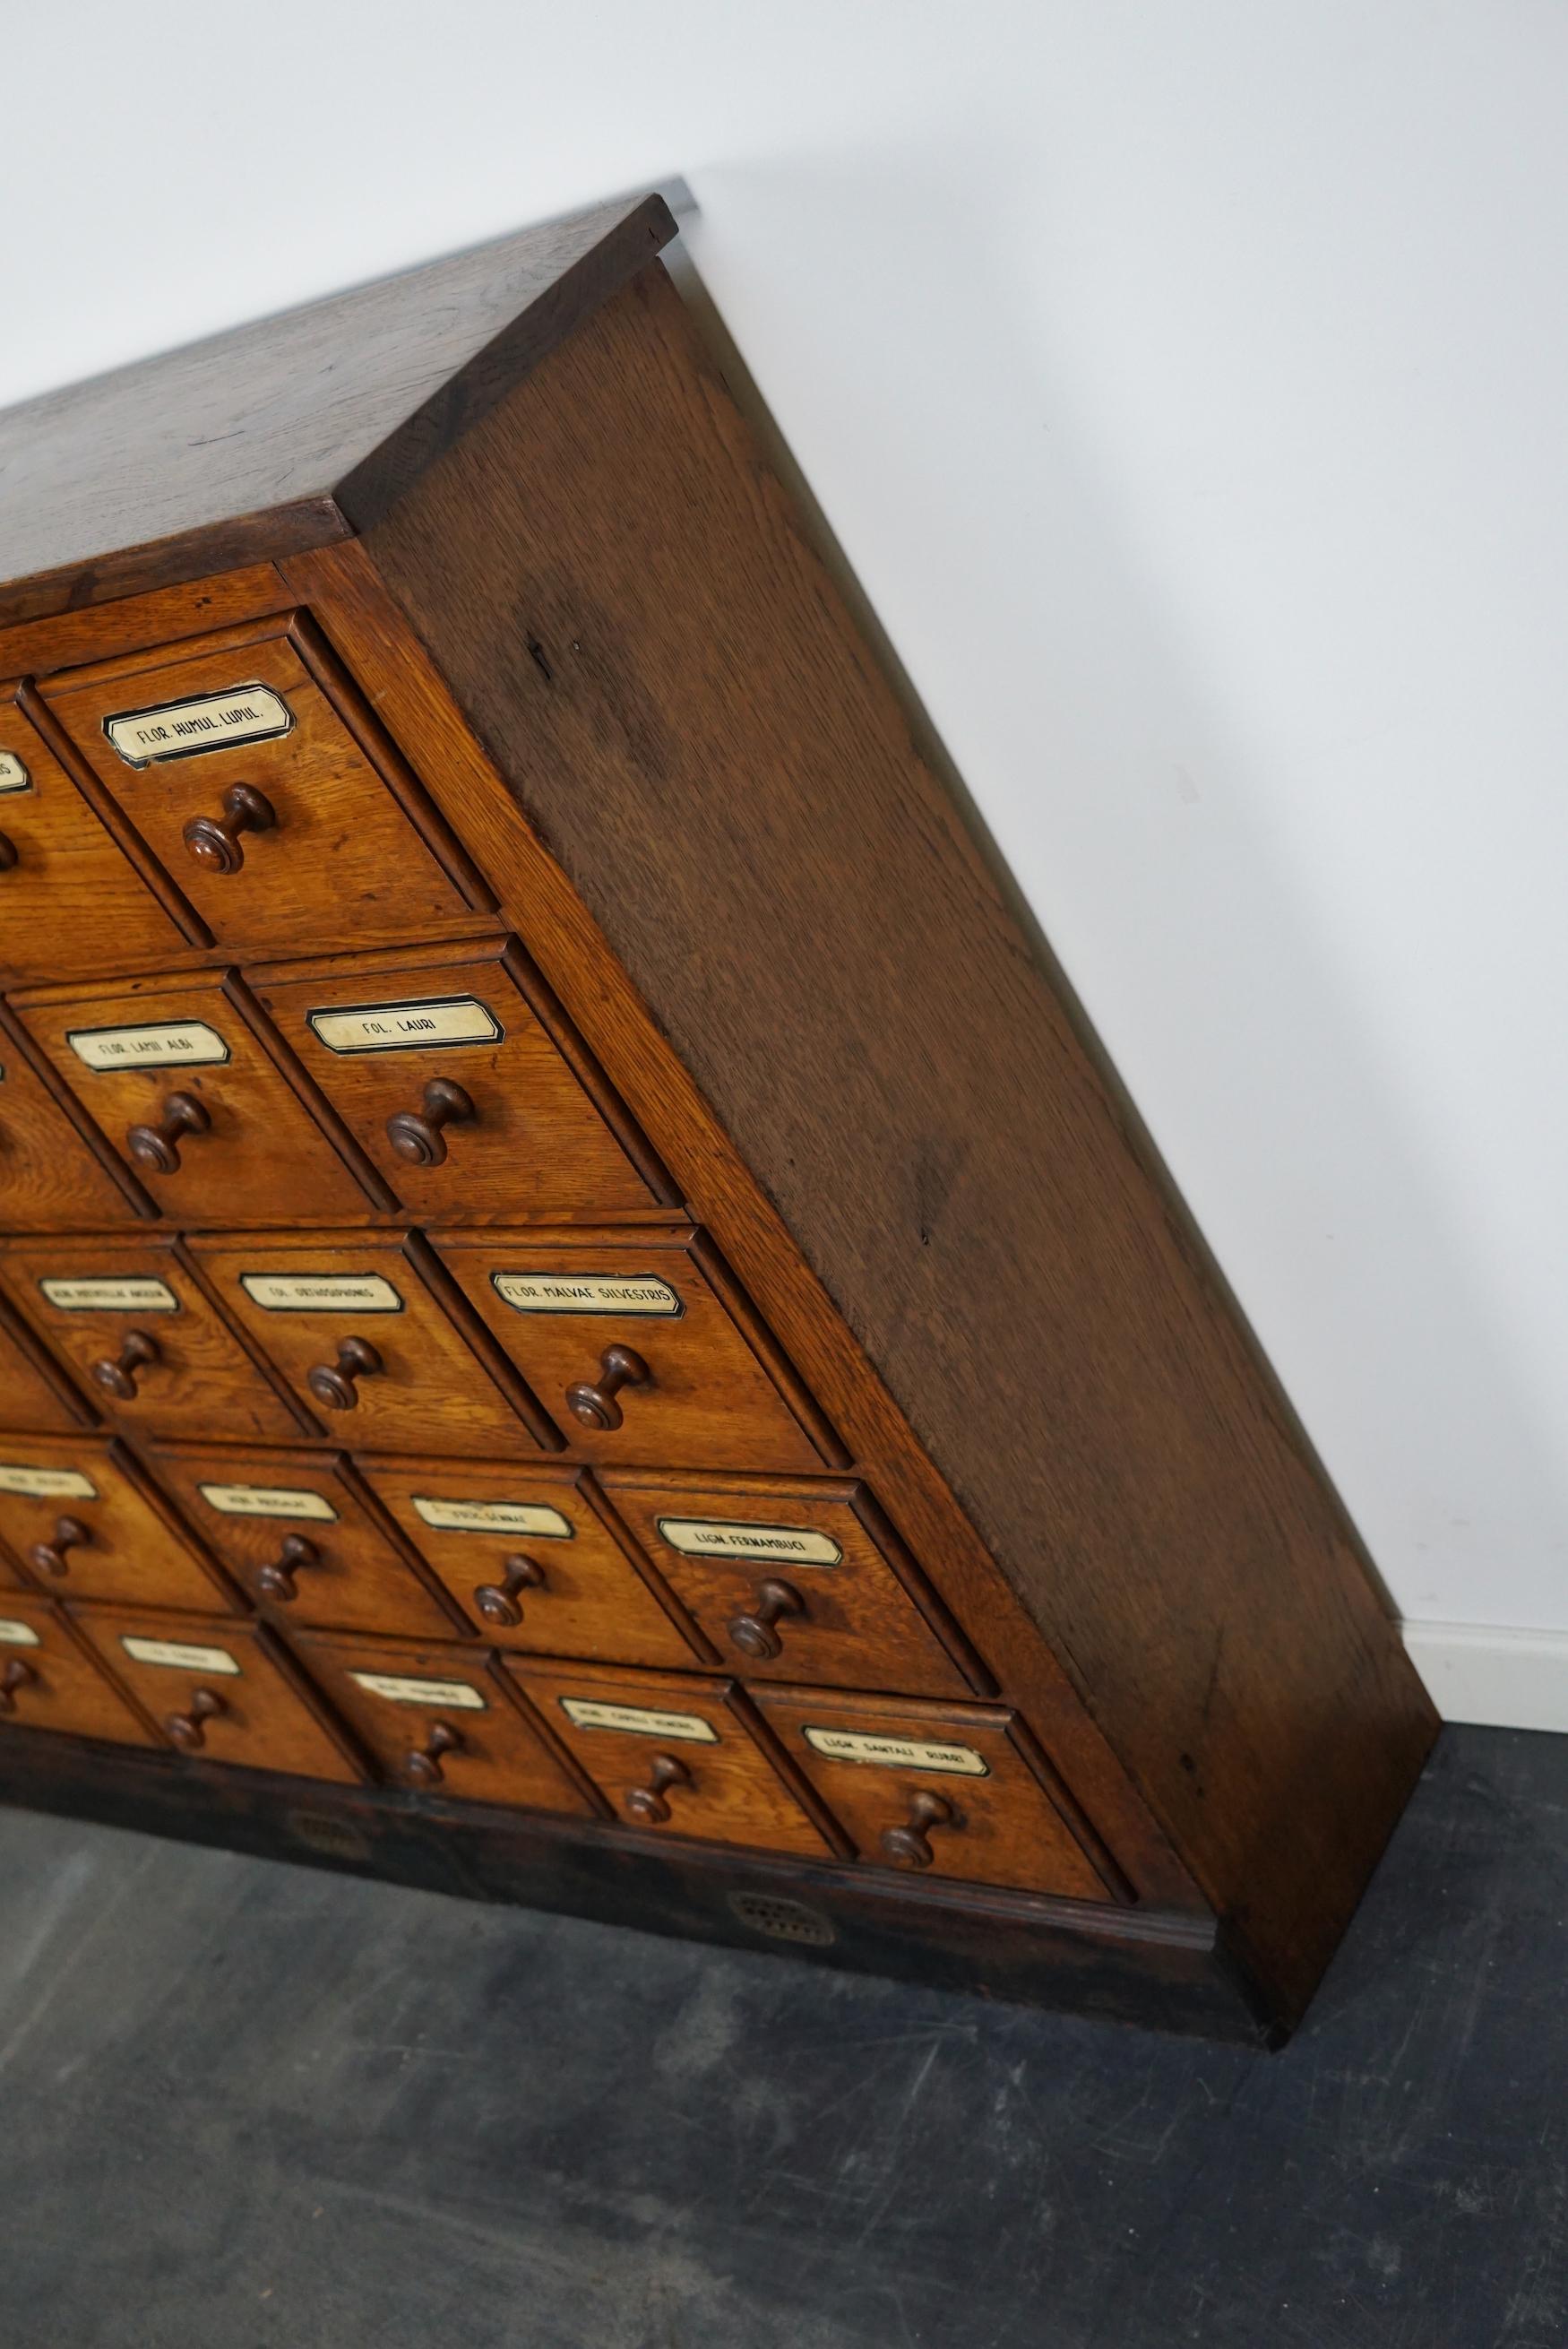 This apothecary cabinet was made circa early 20th century in Germany. The piece is made from oak and features 30 drawers with the original labels and wooden knobs. The interior dimensions of the drawers are: DWH 18 x 17 x 11.5 cm and 18 x 14 x 11.5